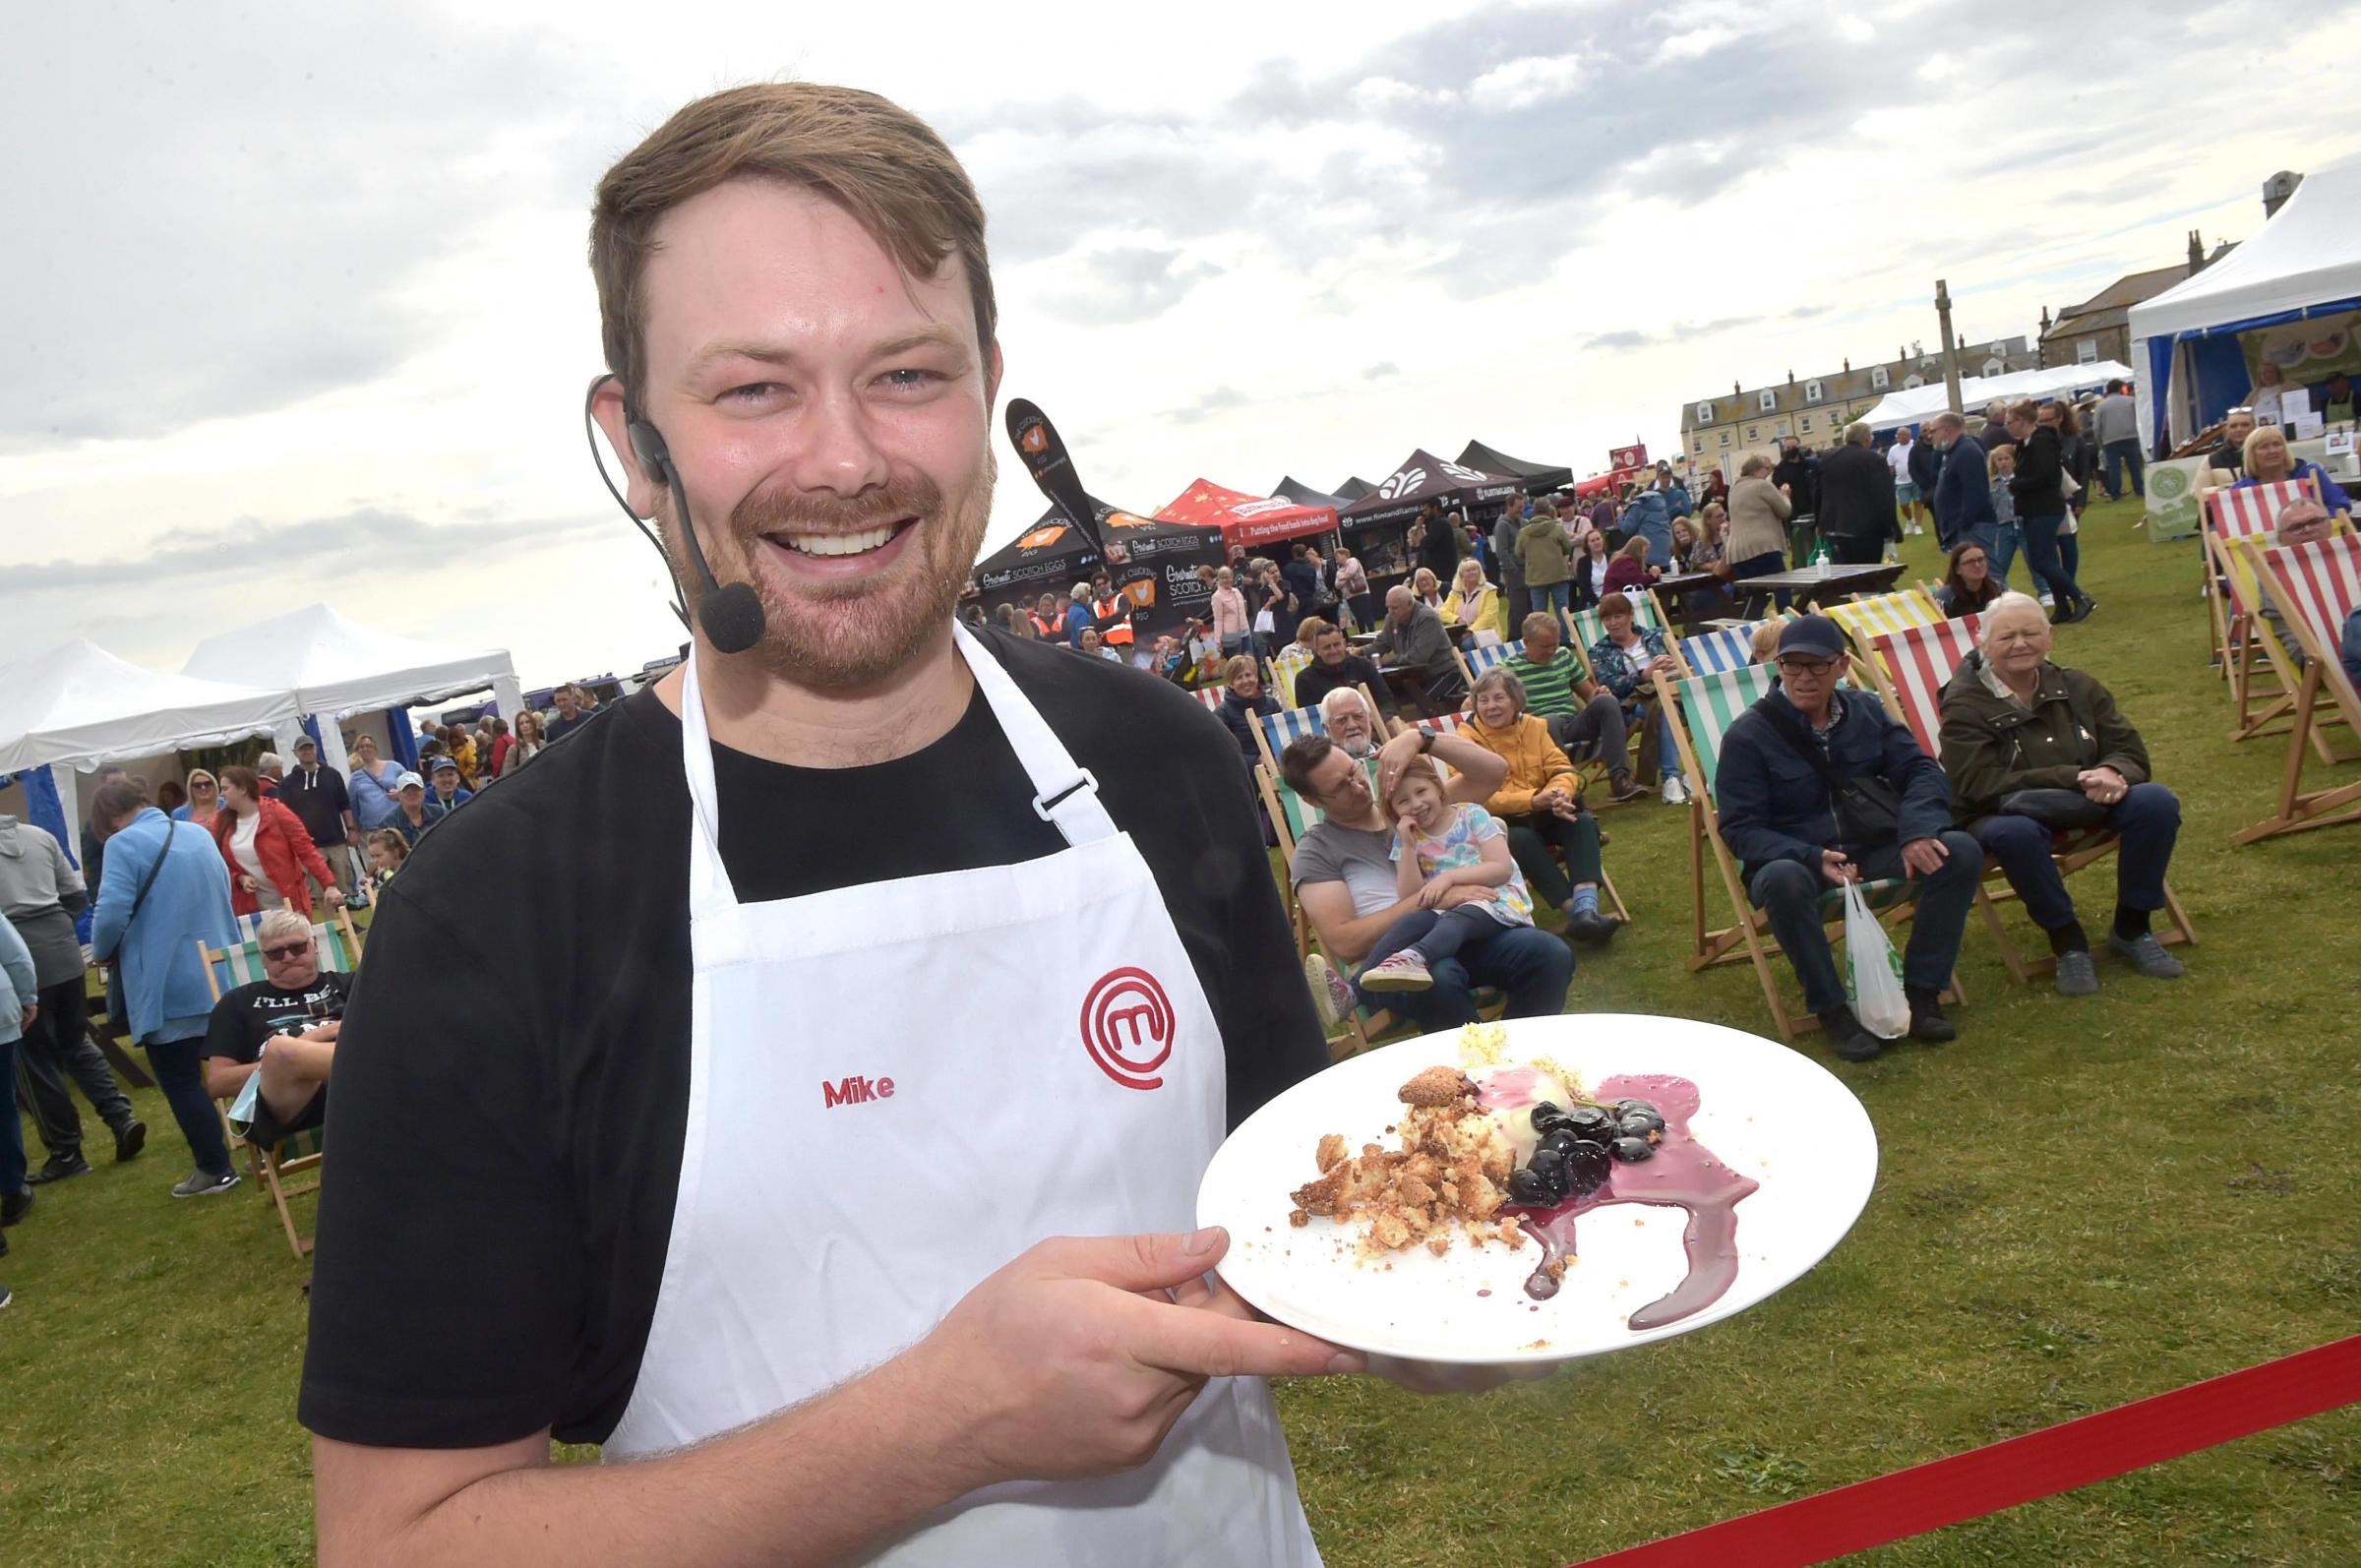 Seaham Food Festival. Local chef Mike Bartley gives a demo and shows the finished dish. 7/8/21 Pic Doug Moody Photography.